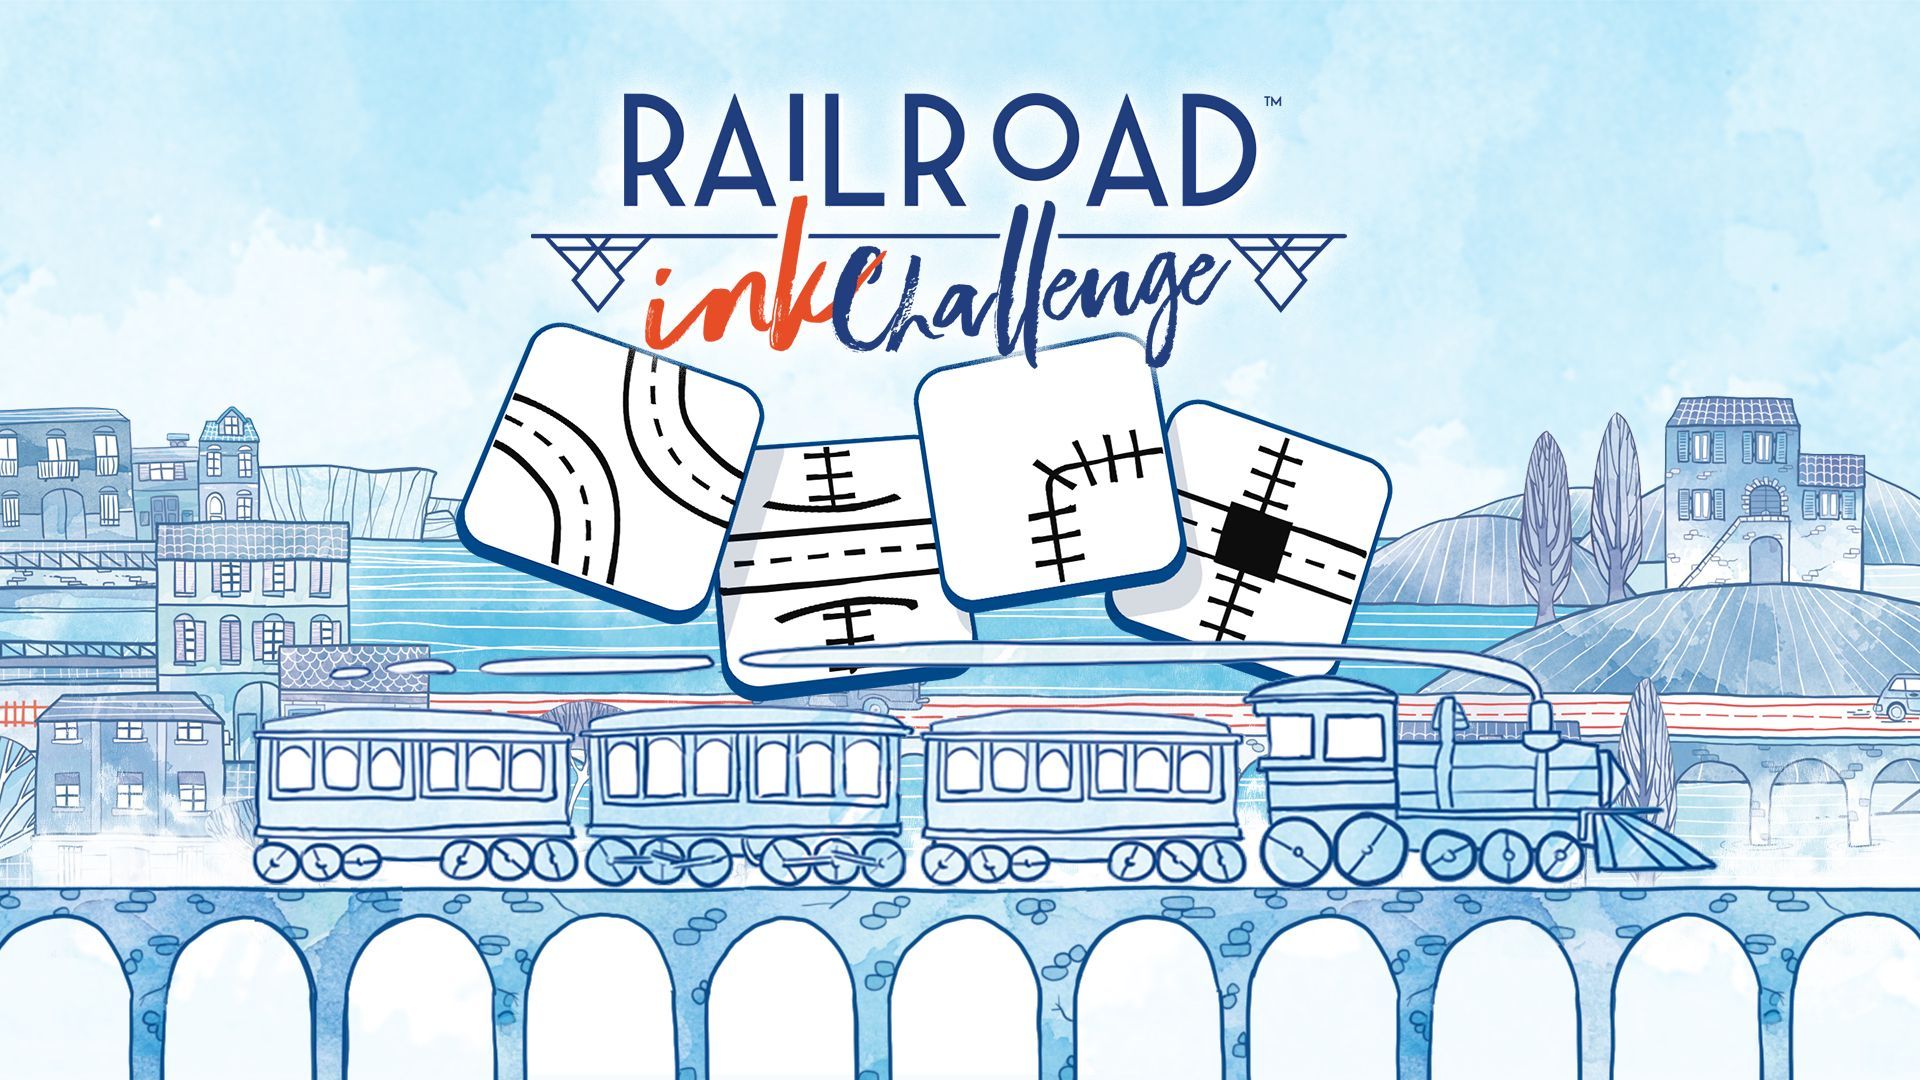 Railroad Ink Challenge is out now on Mobile, PC, and Mac with Cross-Platform Support